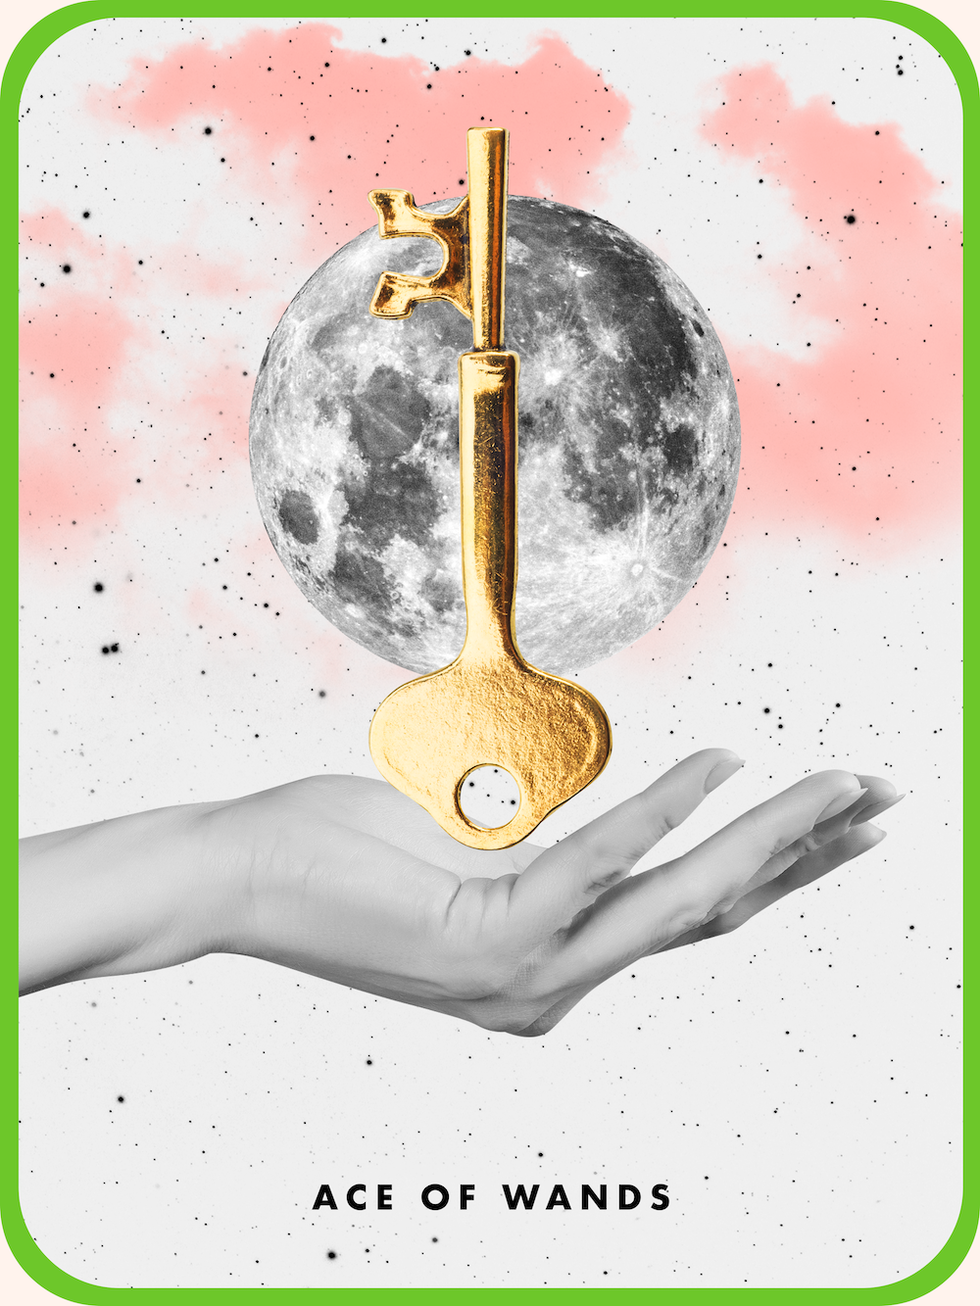 the ace of wands tarot card, showing a black and white hand holding up a golden key over a full moon